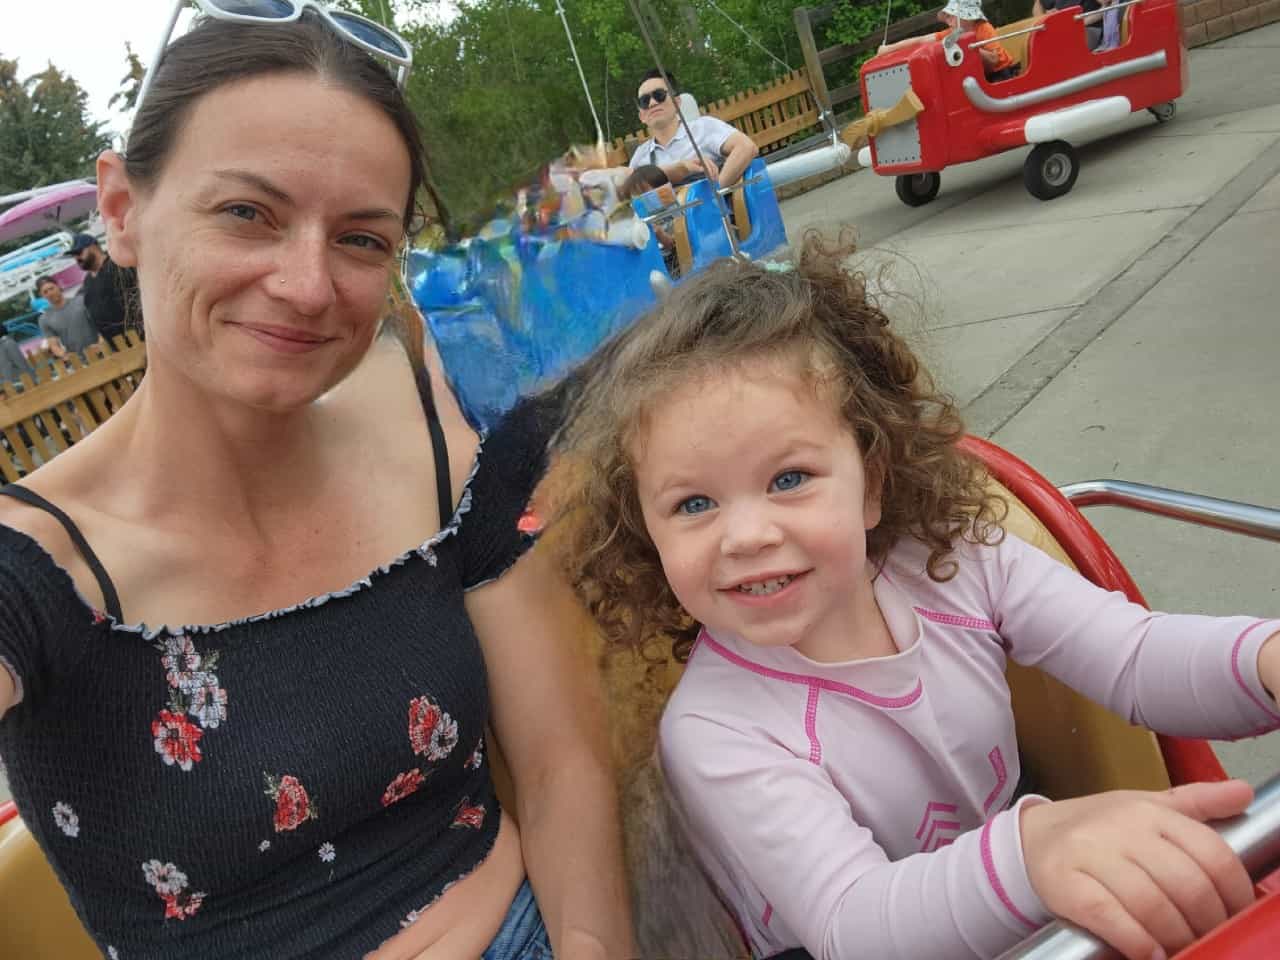 Fun Times at Calaway Park Alberta  - Little seeker was so excited to be tall enough for new rides this year!